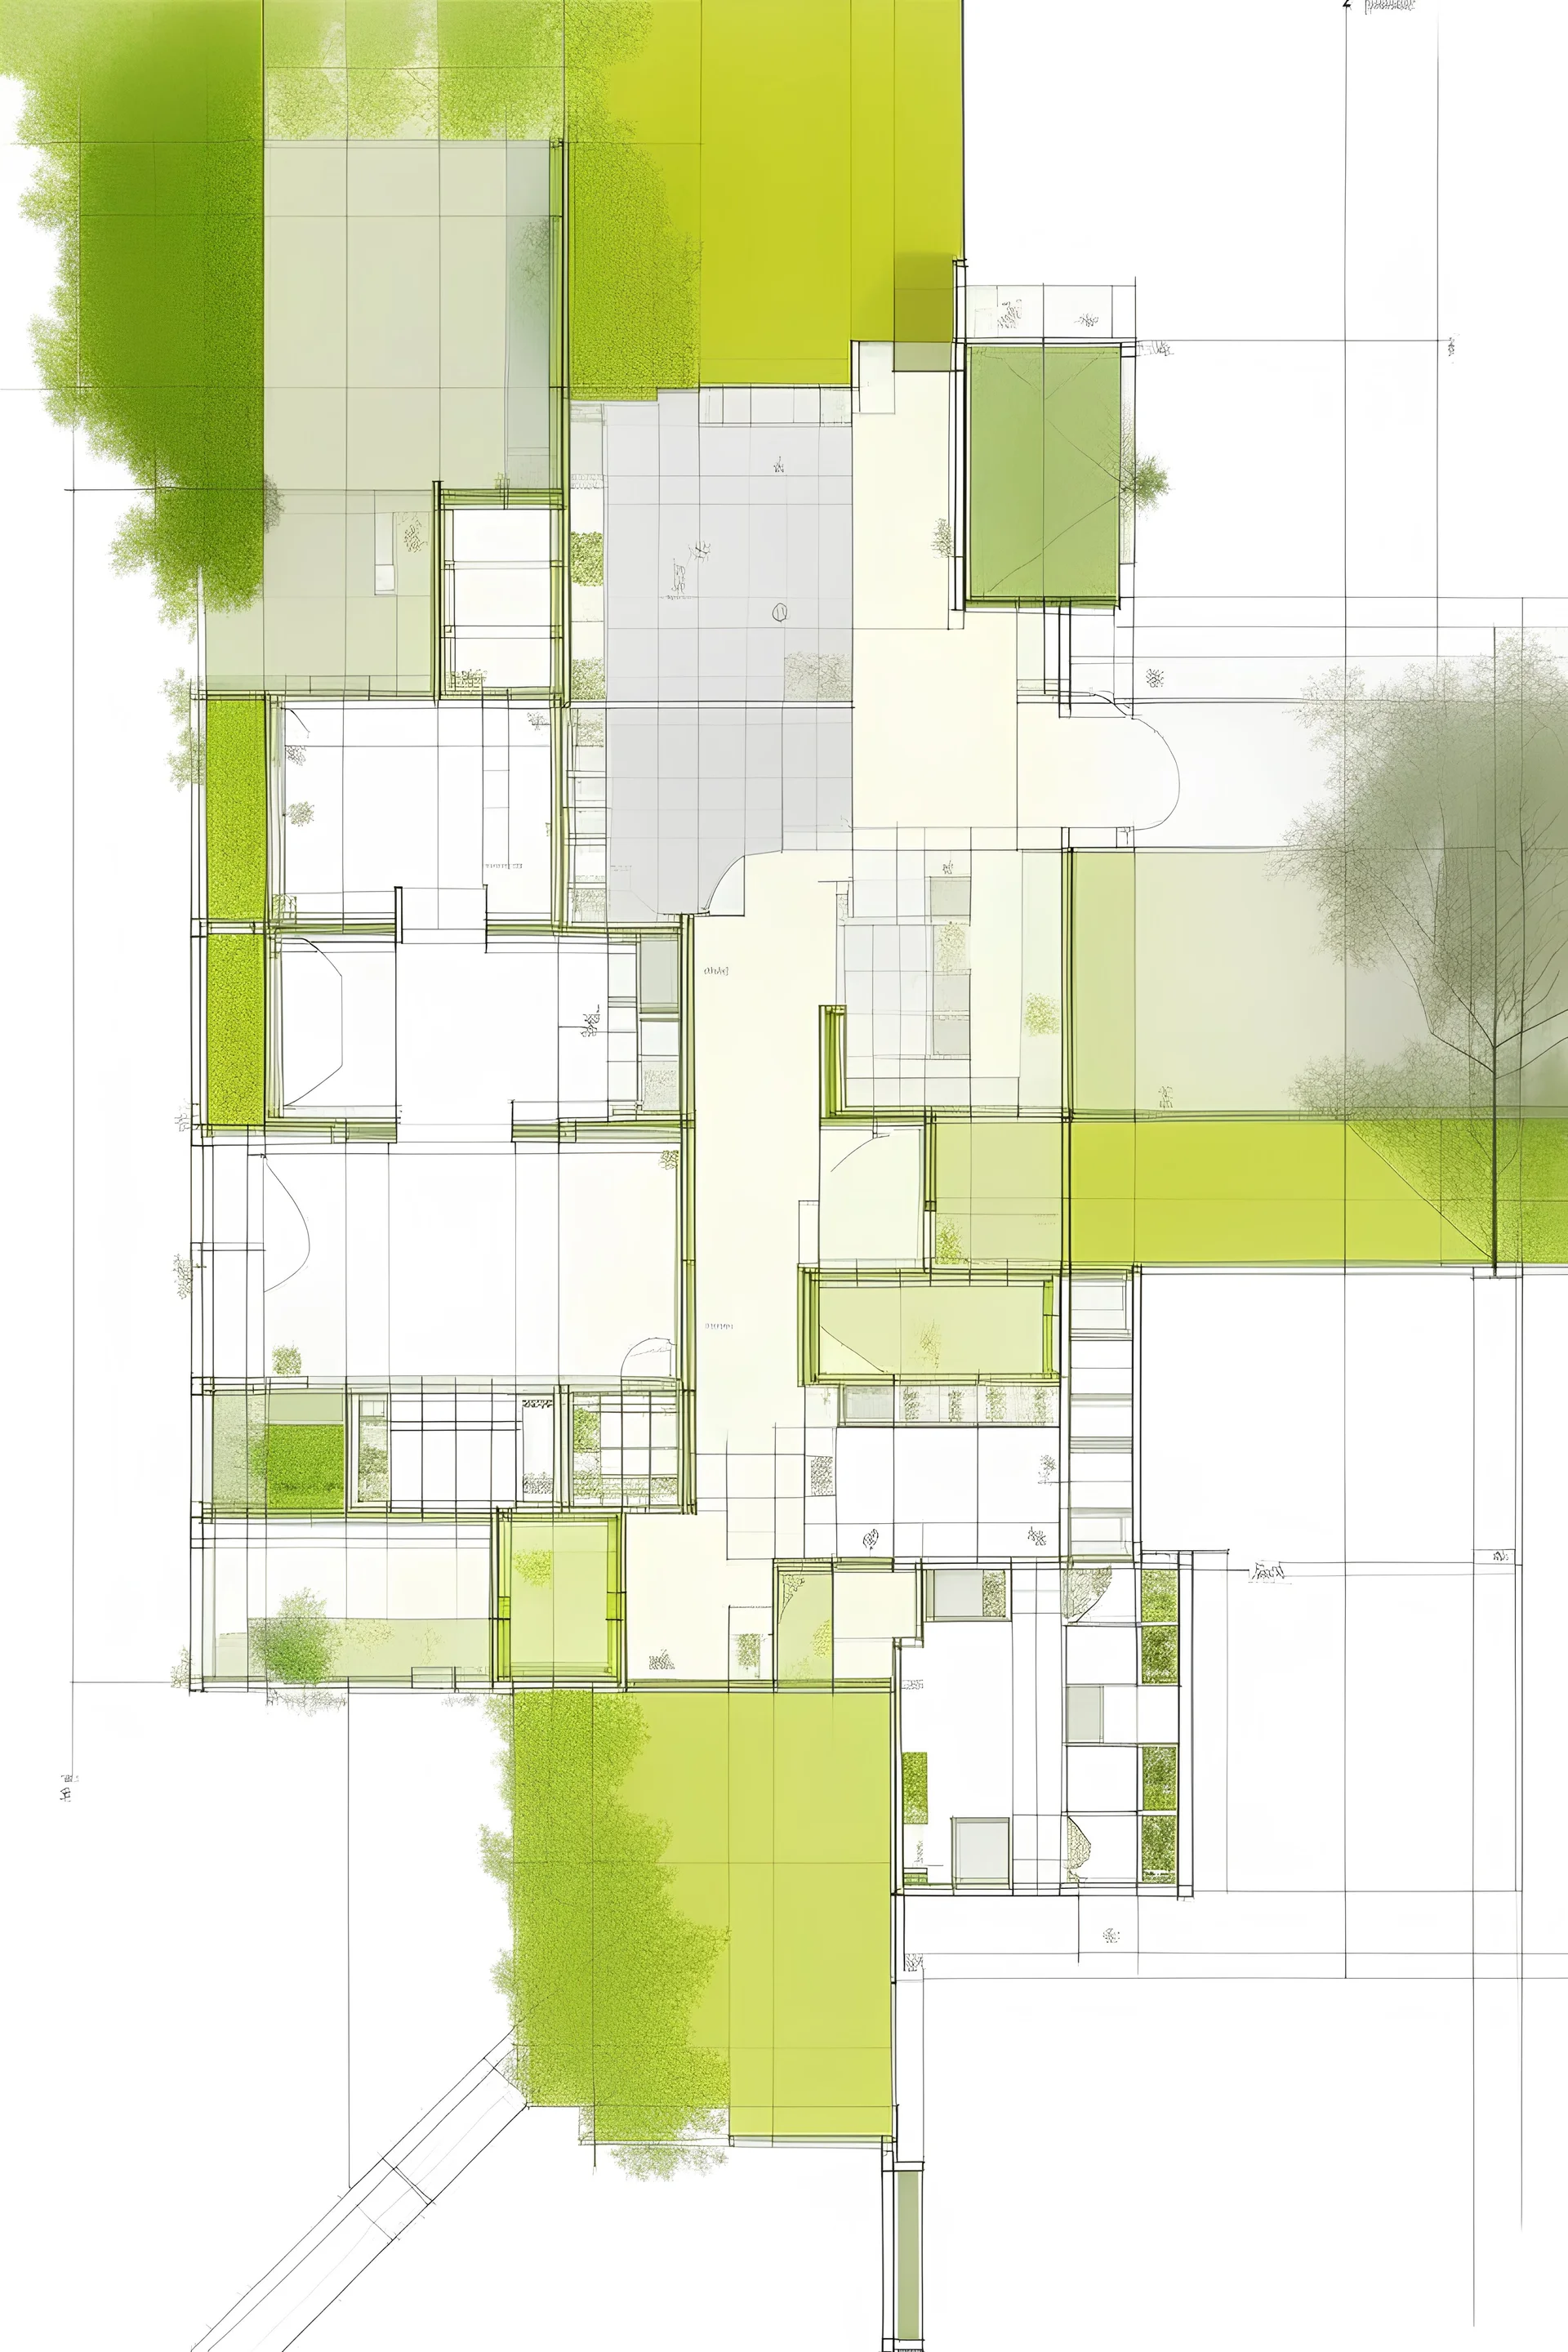 detailed floor plan of villa dall’ava from rem koolhaas